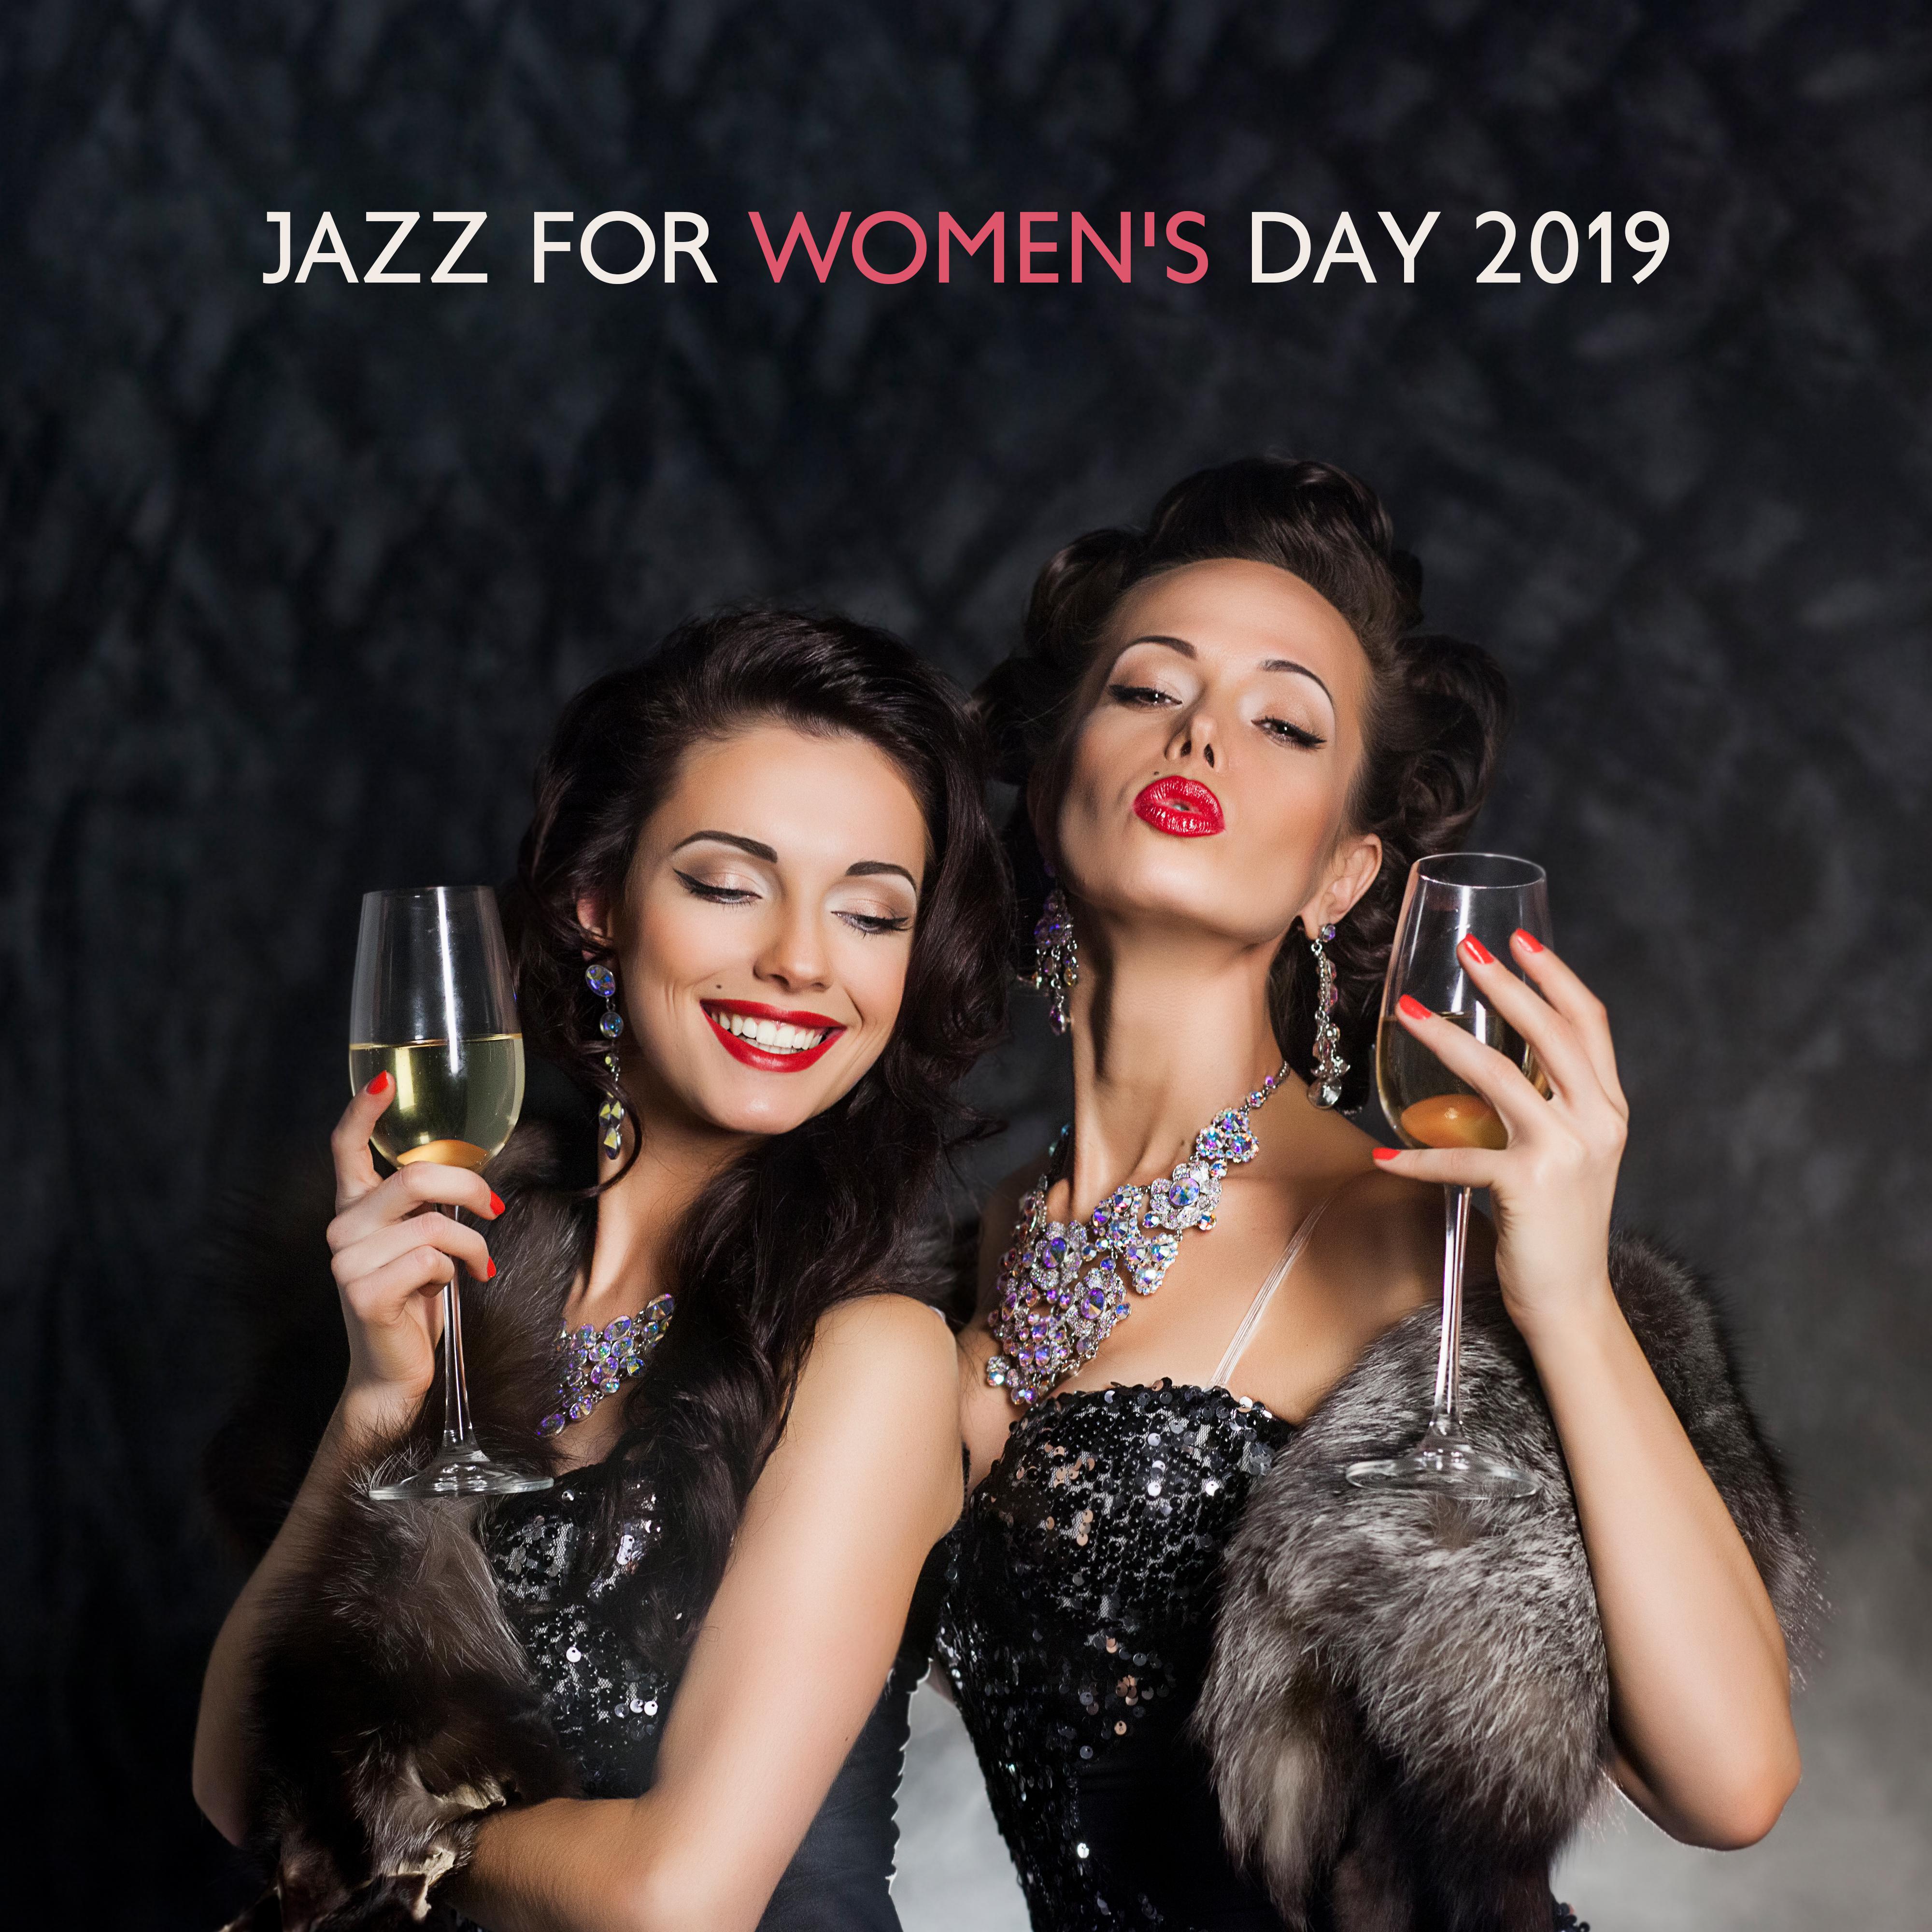 Jazz for Women' s Day 2019  Relaxing Piano Music, Instrumental Jazz Music Ambient, Ladies Vibes, Jazz Coffee, Smooth Music for Woman